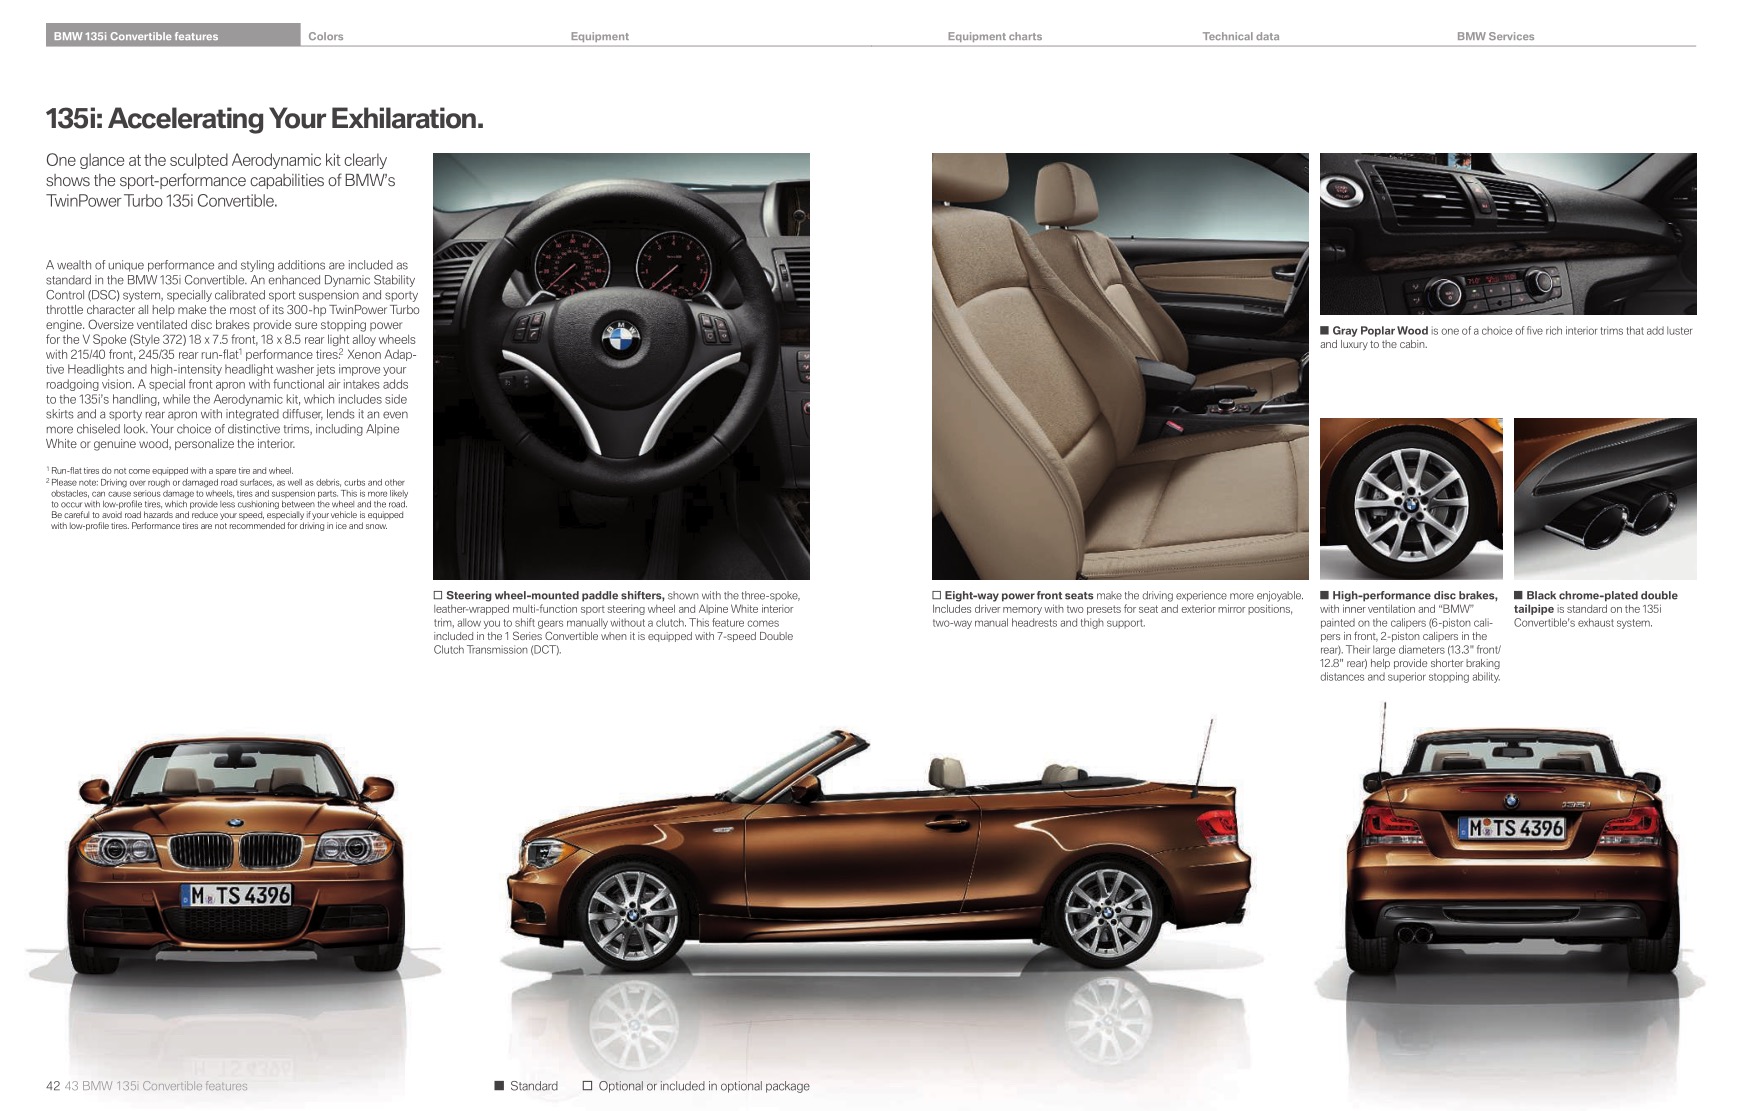 2012 BMW 1-Series Convertible Brochure Page 4